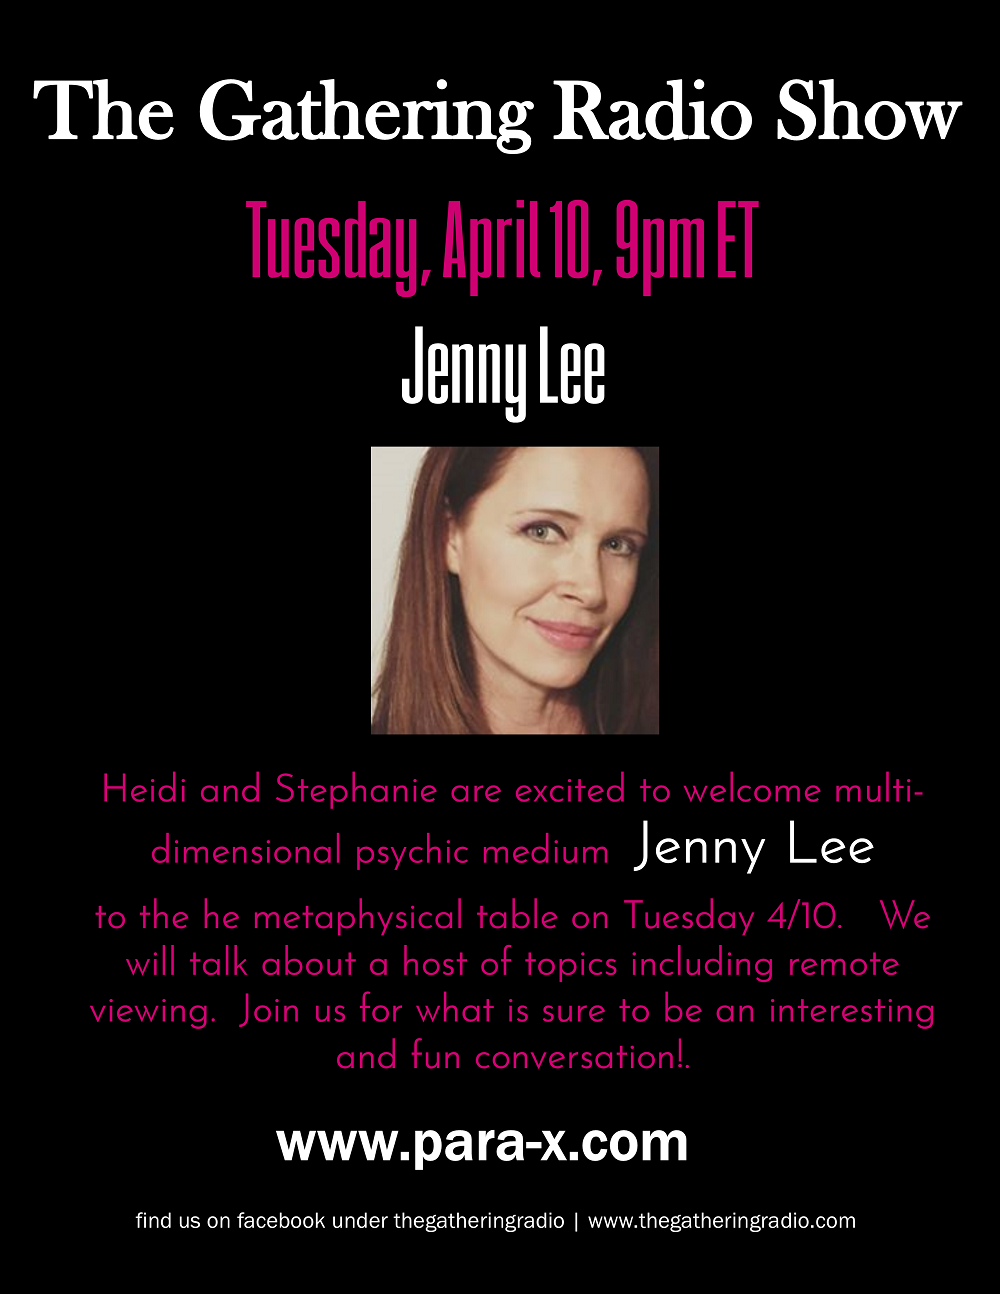 Heidi and Stephanie talk remote viewing with multi-dimensional psychic medium Jenny Lee!